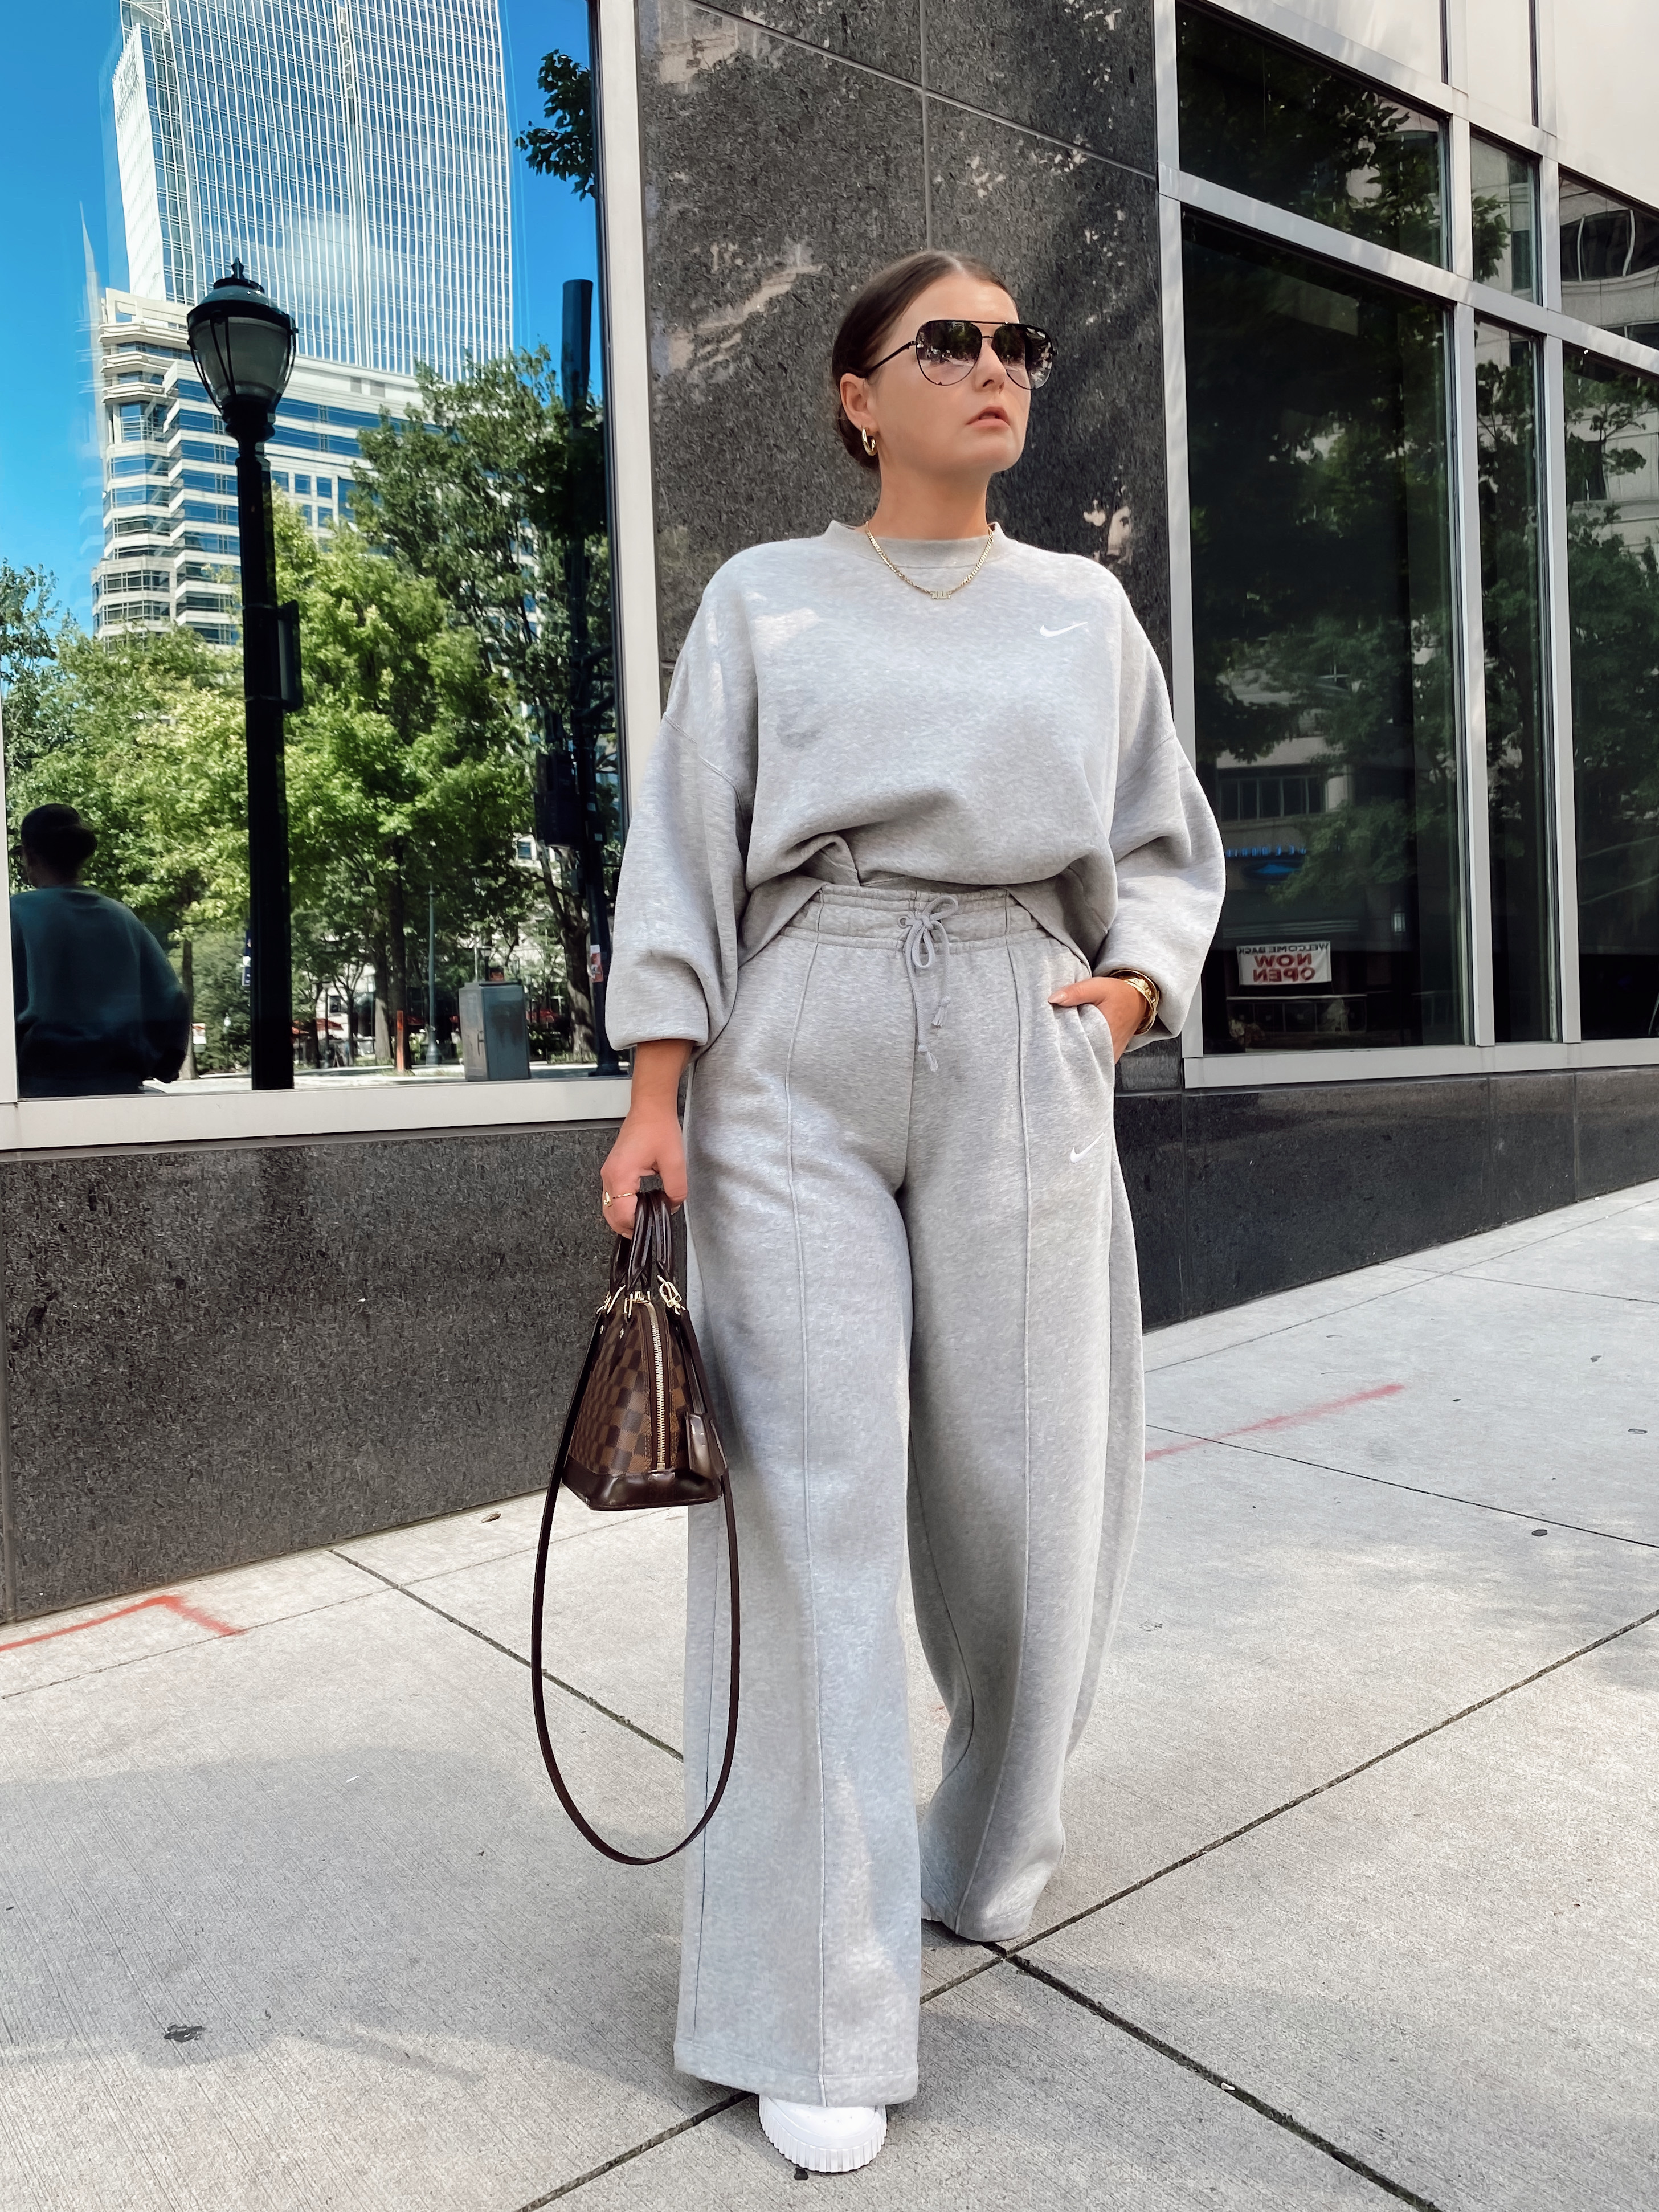 8 SWEATSUIT OUTFIT IDEAS FOR WINTER: http://www.juliamarieb.com/2021/01/03/8-sweatsuit-outfit-ideas-for-winter/ | @julia.marie.b